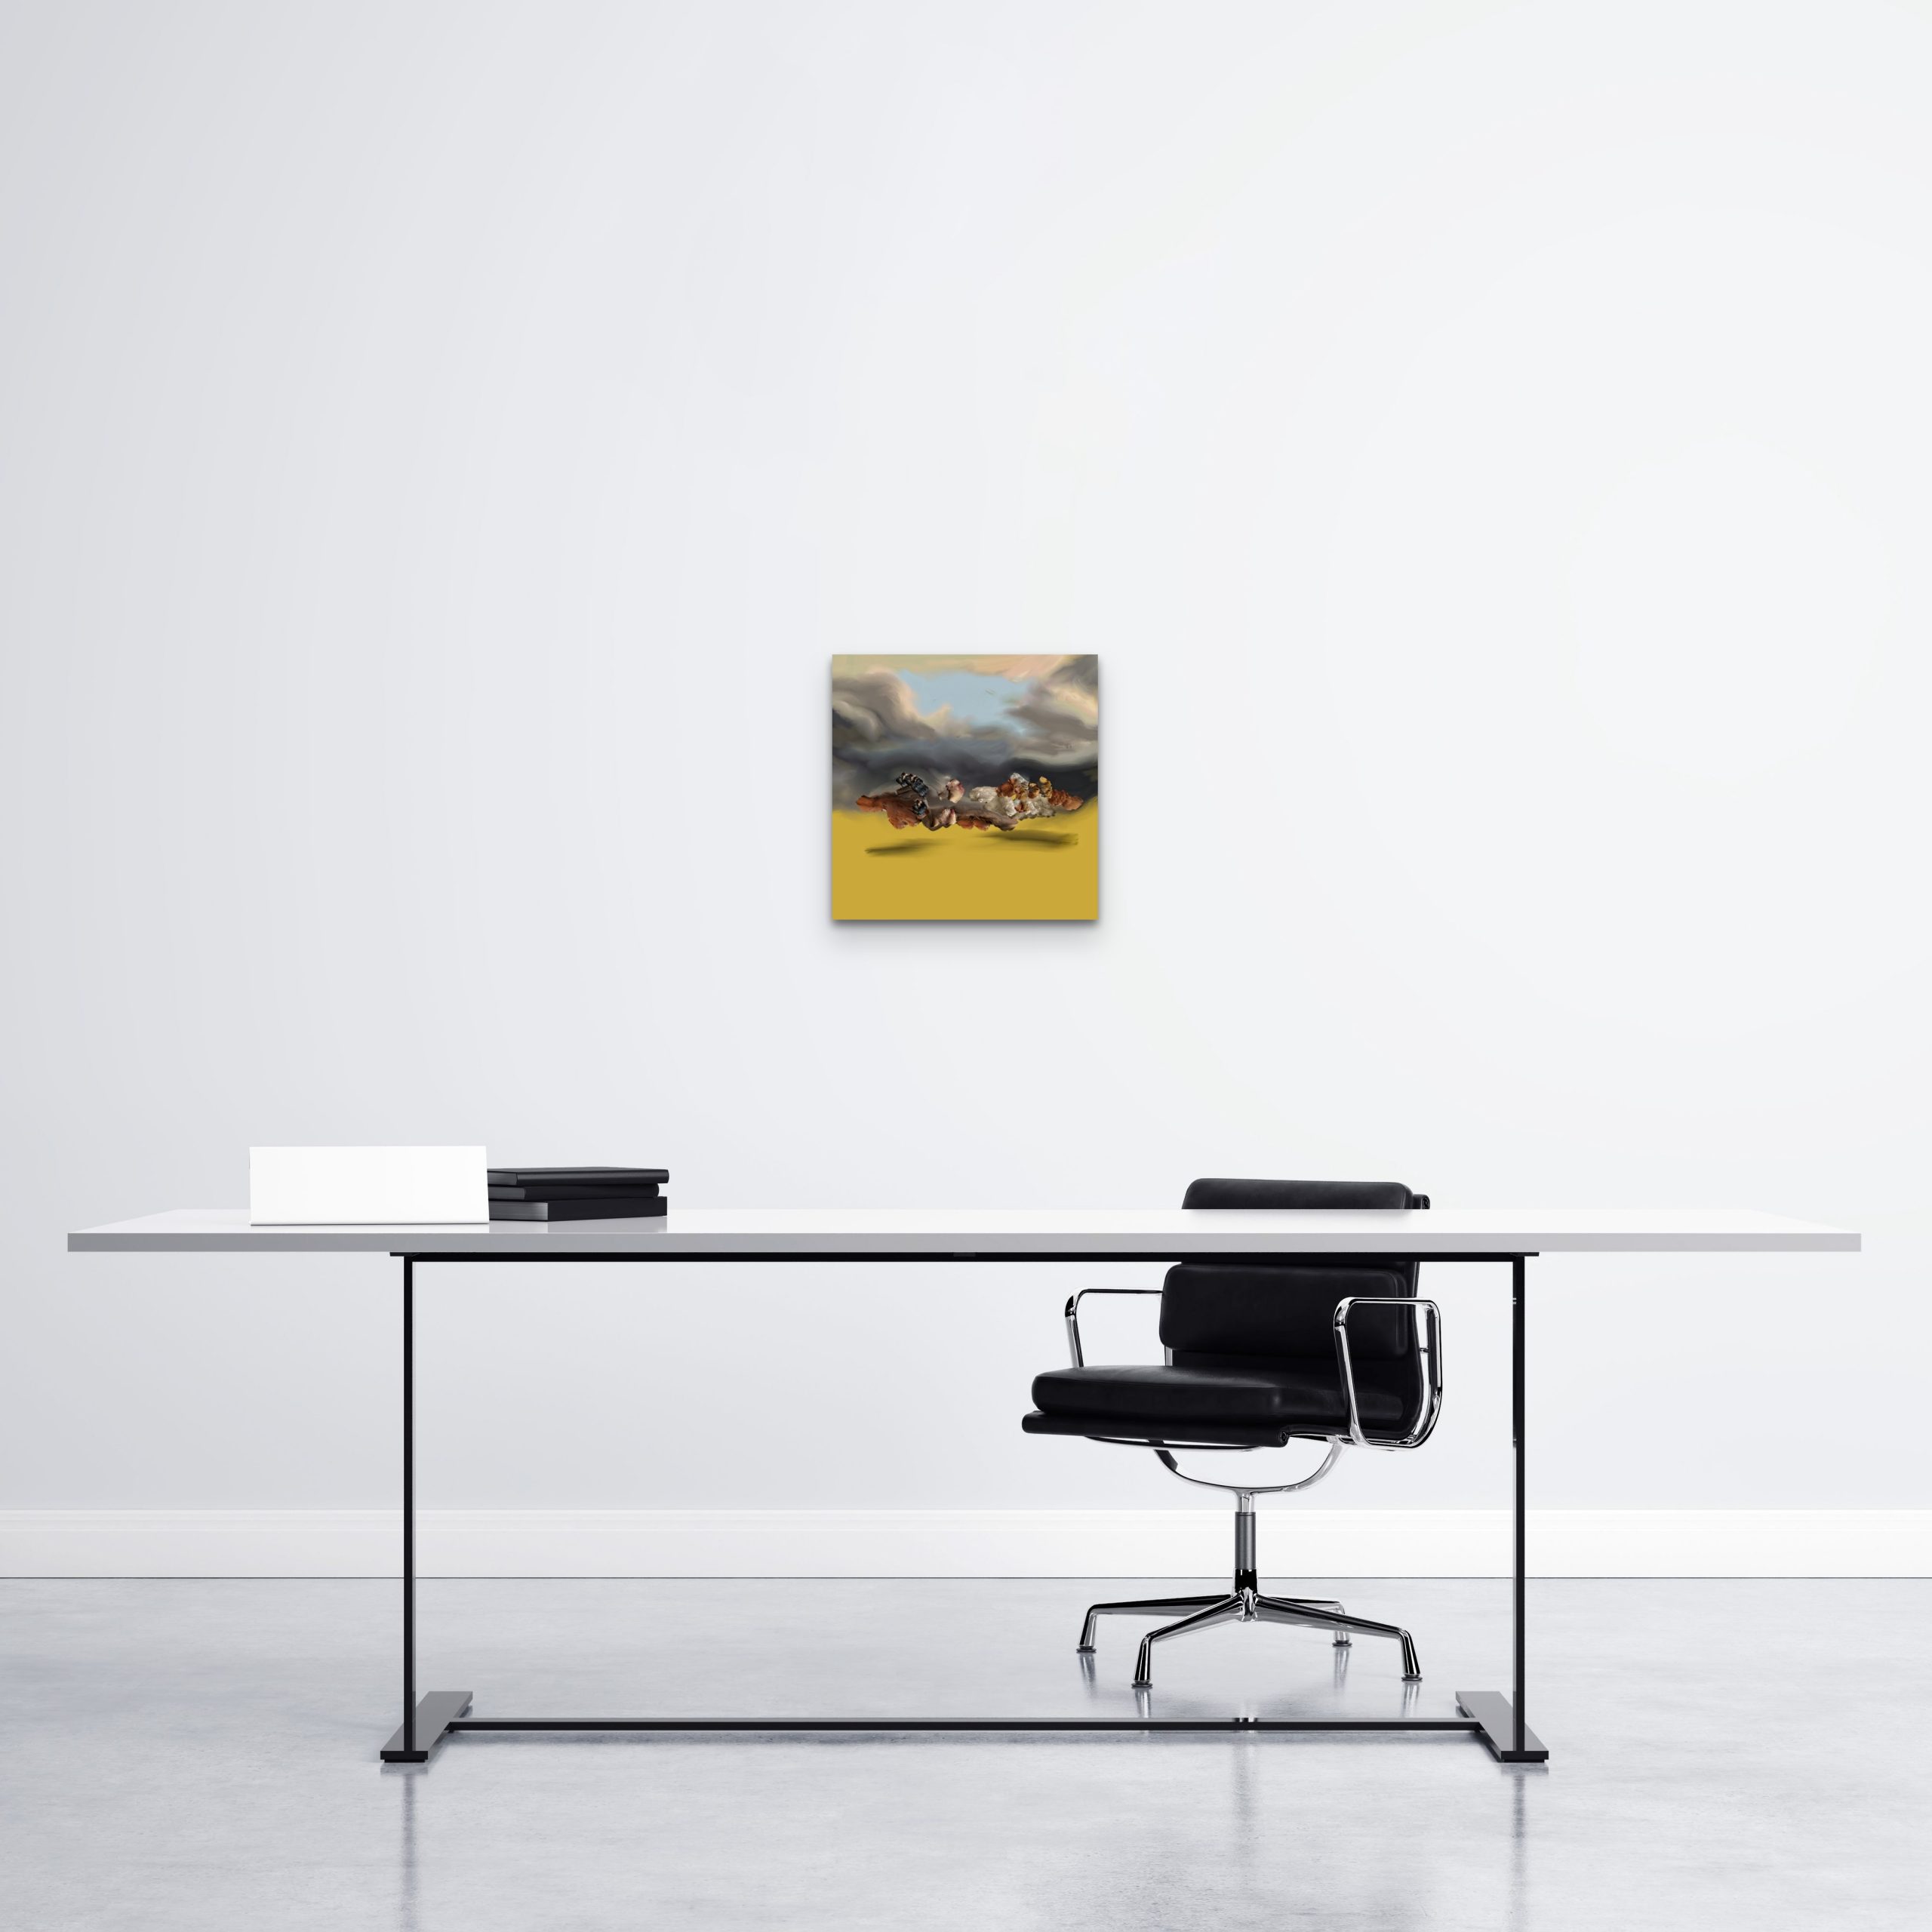 An artwork measuring 12 x 12 inches displayed in an office setting. The colourful piece adds a touch of creativity and vibrancy to the workspace, enhancing the overall aesthetic appeal.